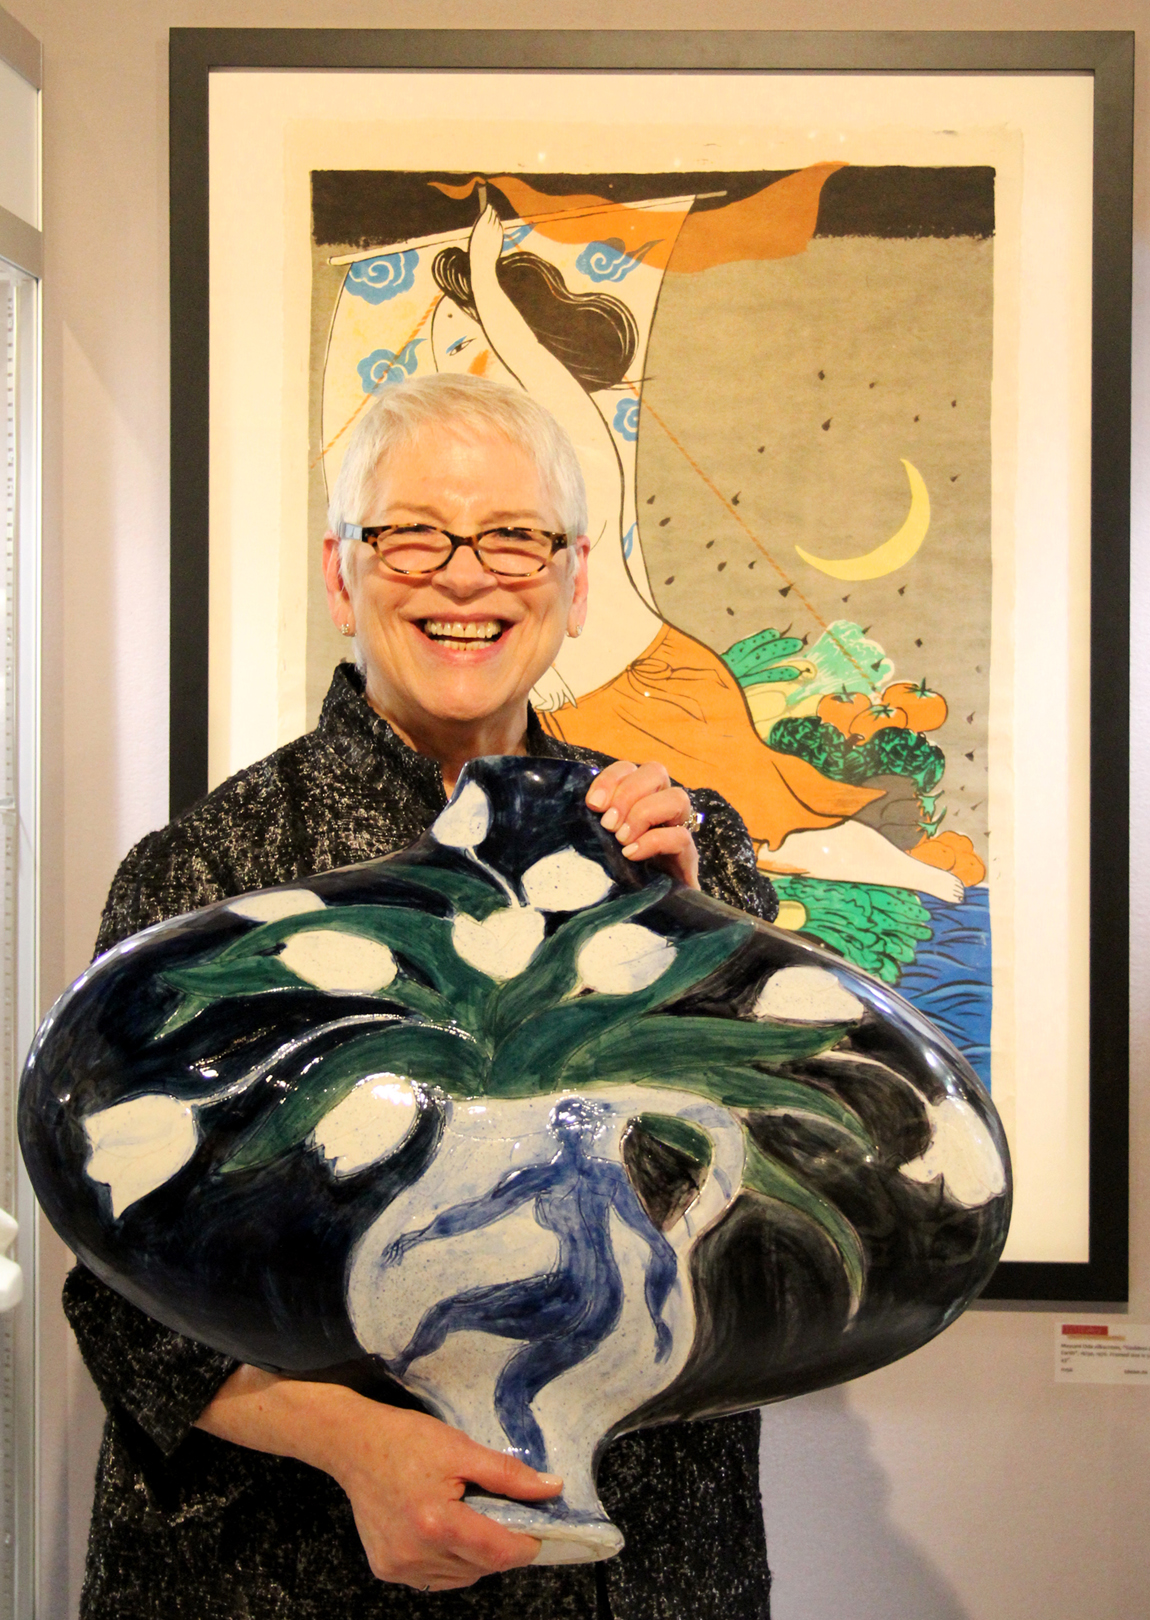 Susan Tillipman of TOJ Gallery, Annapolis, Md., with a “Tulip” vase of 1994 by contemporary French artist Pierre Boncompain.